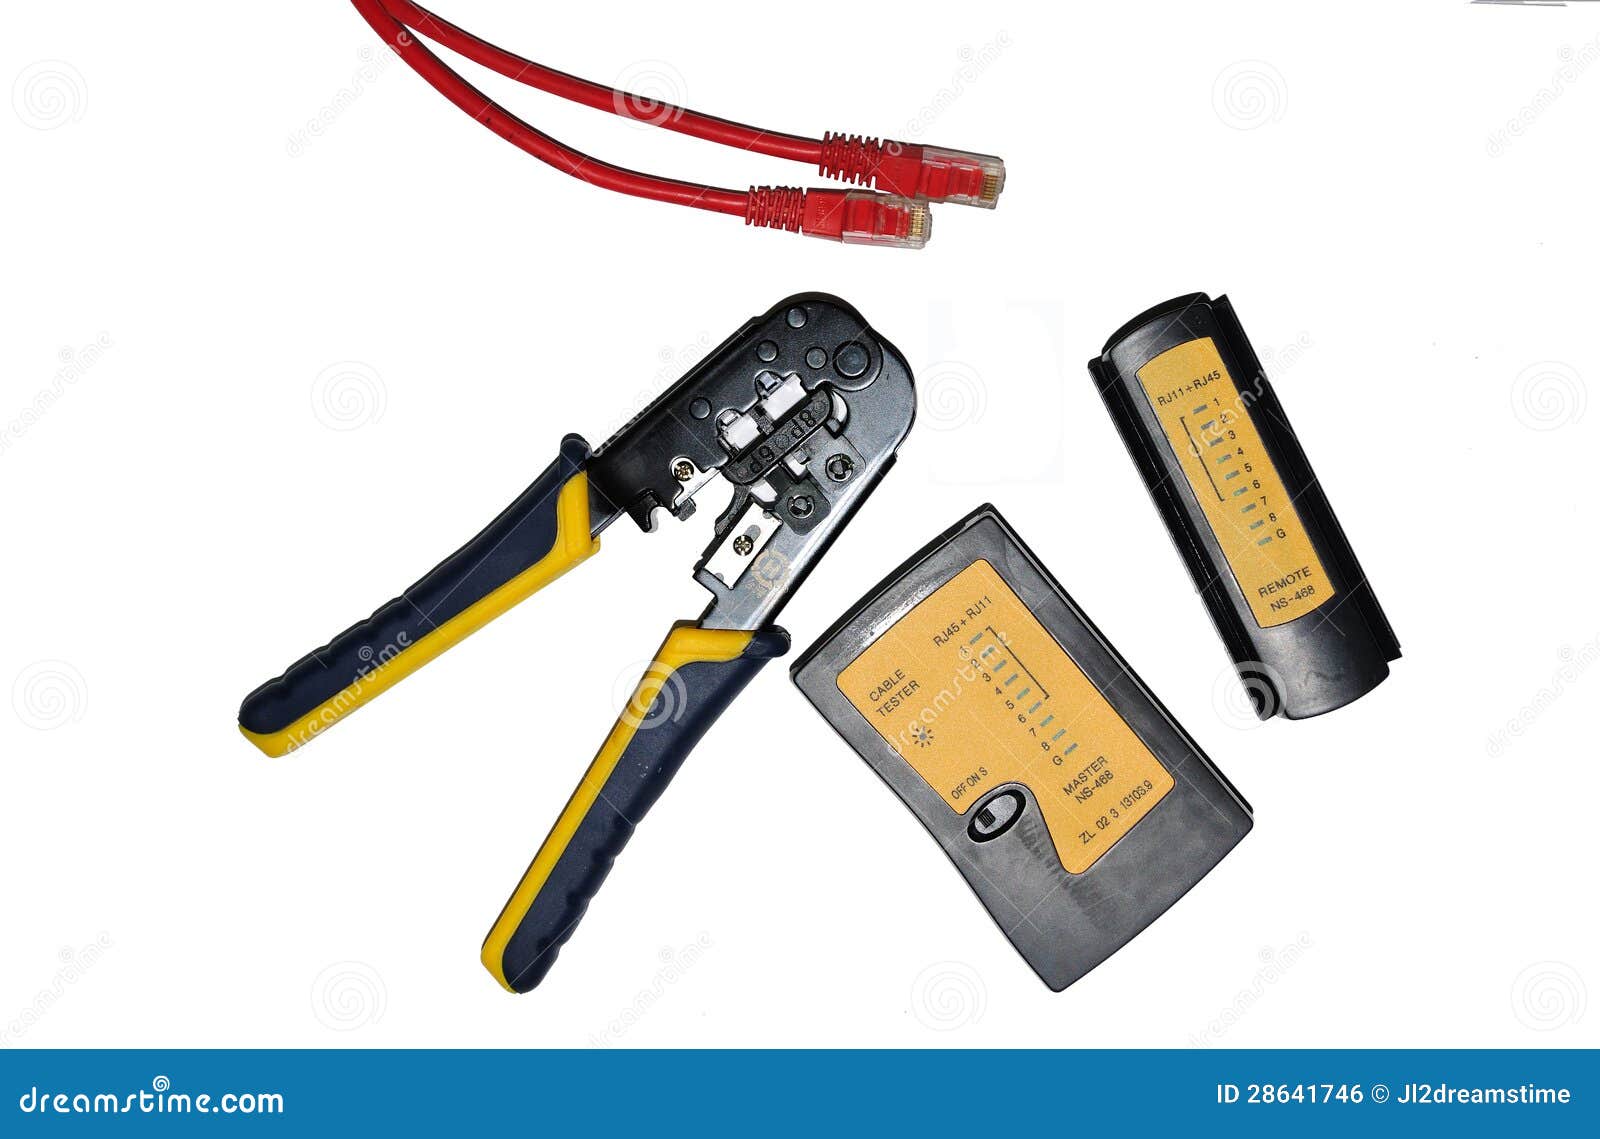 cable tester and tongs